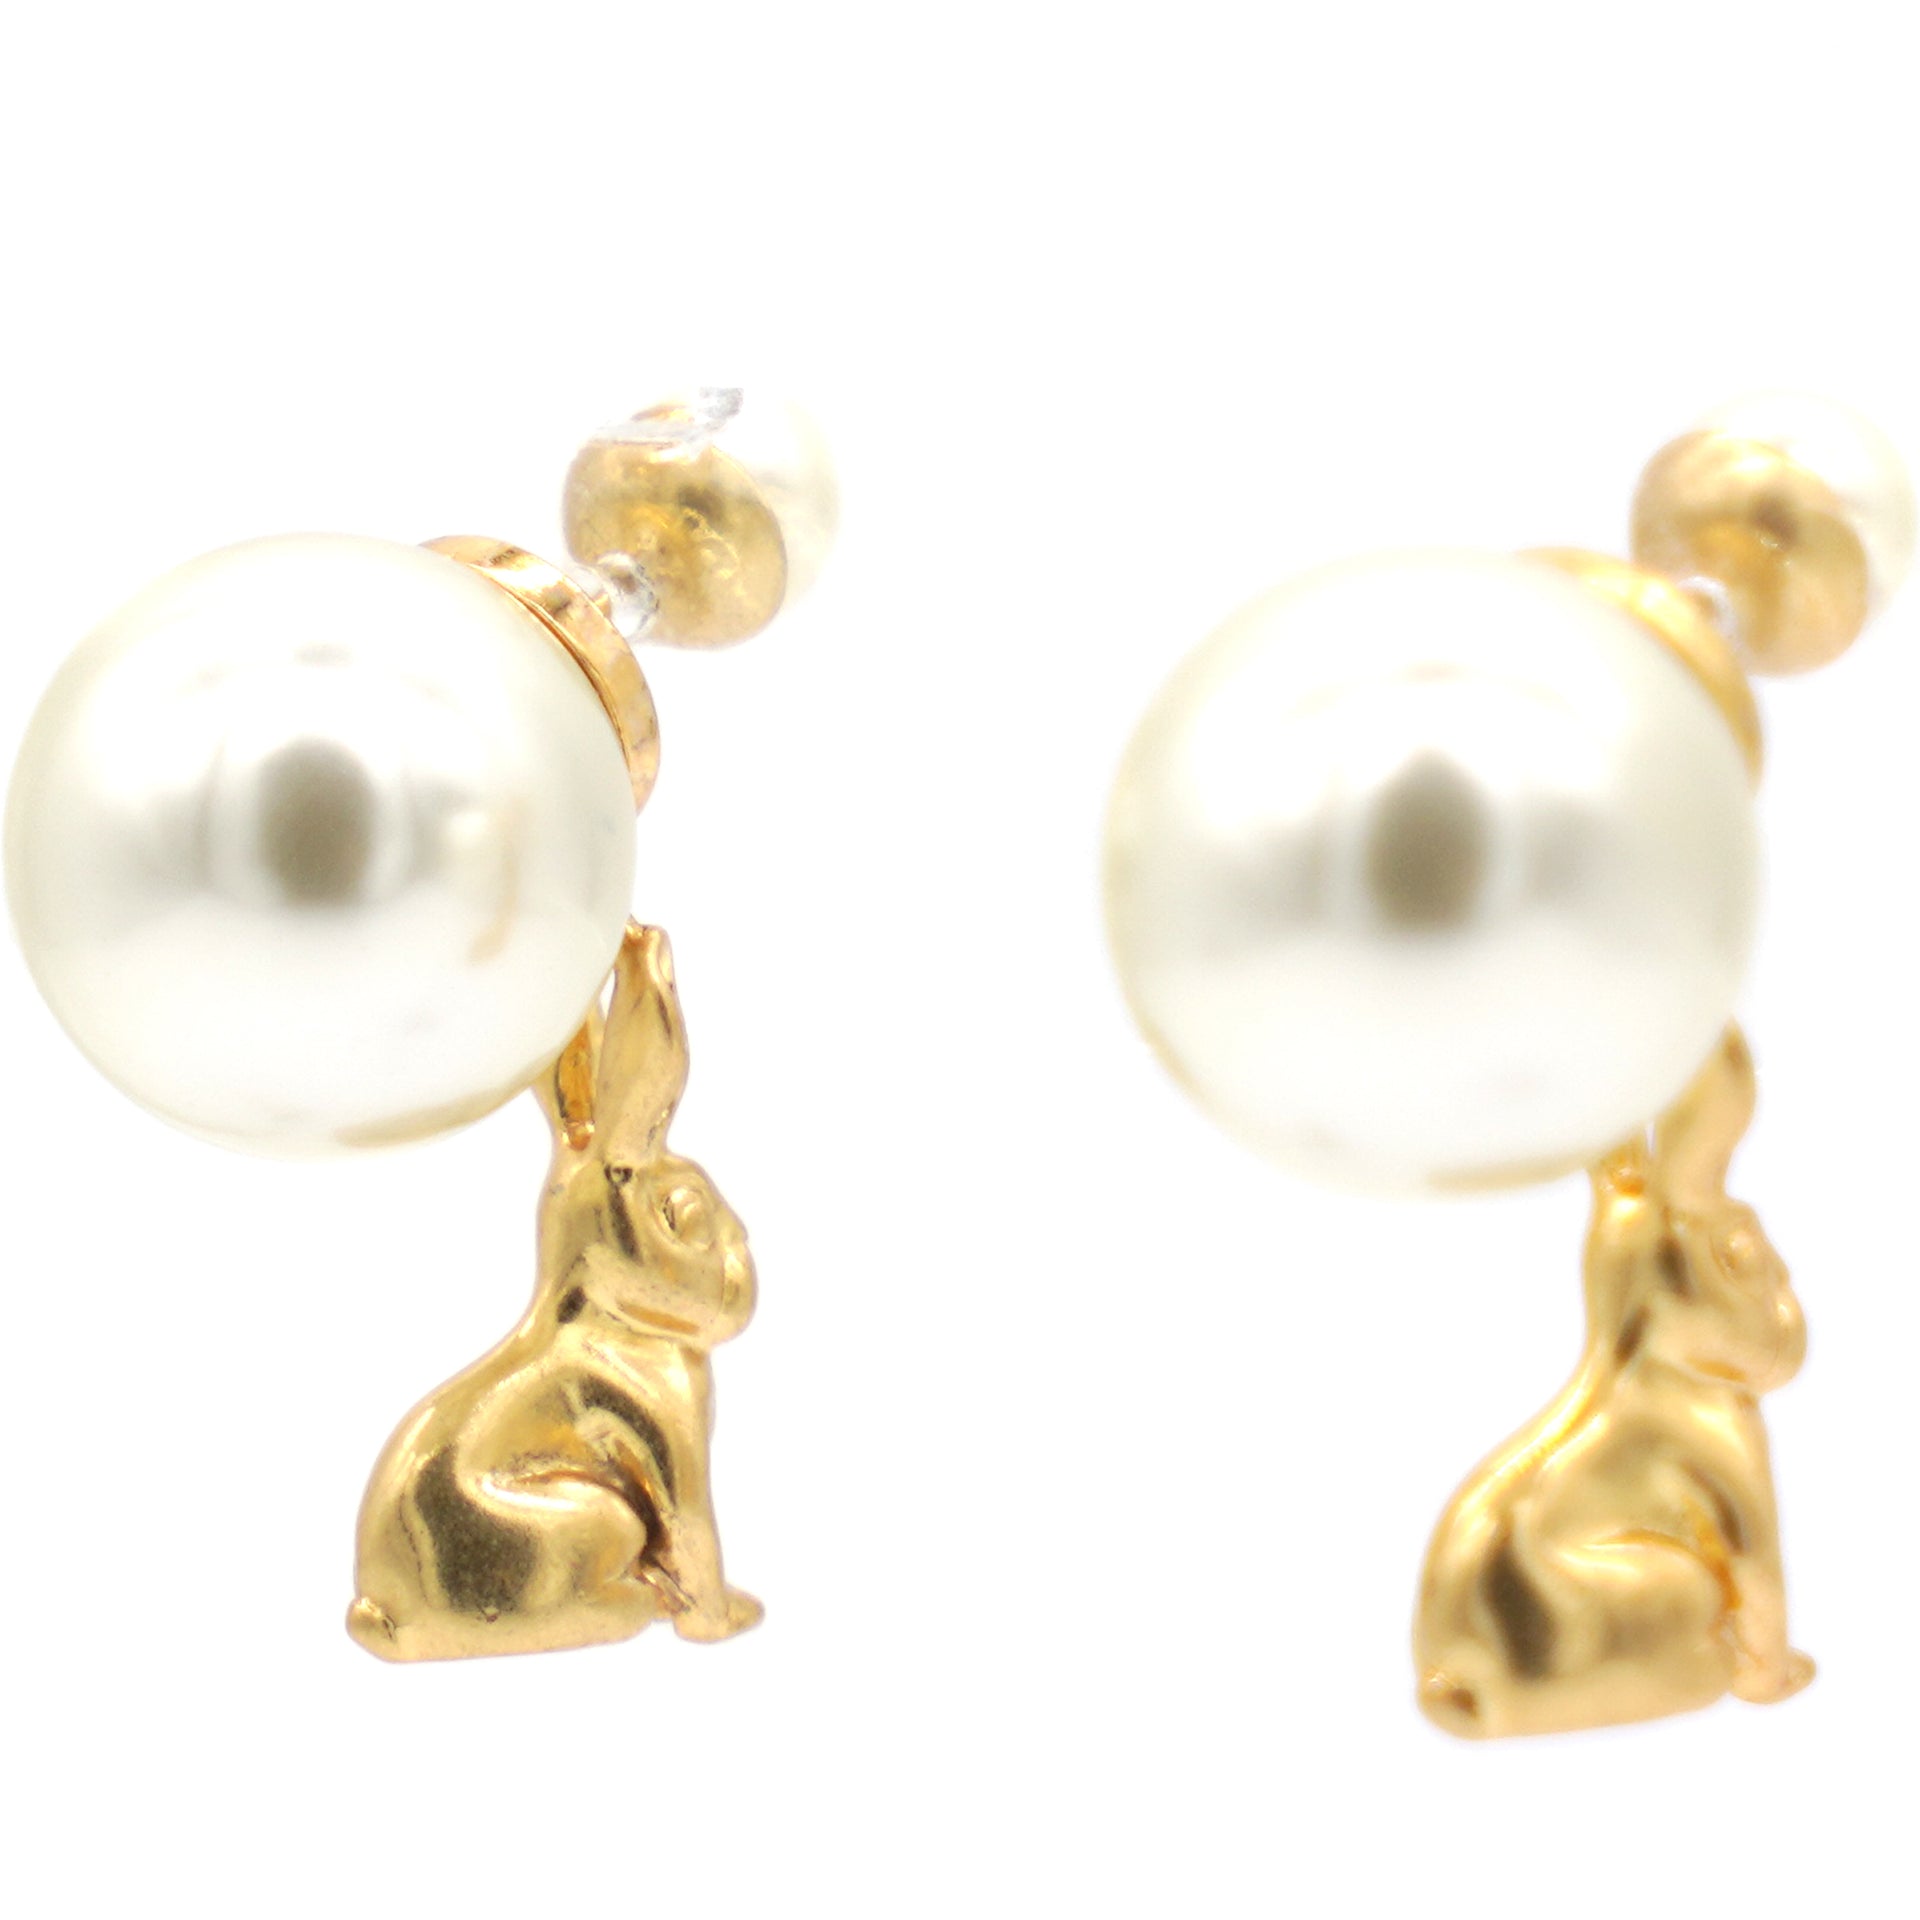 Tribales Earrings with Gold Metal Rabbit Accents and Pearls